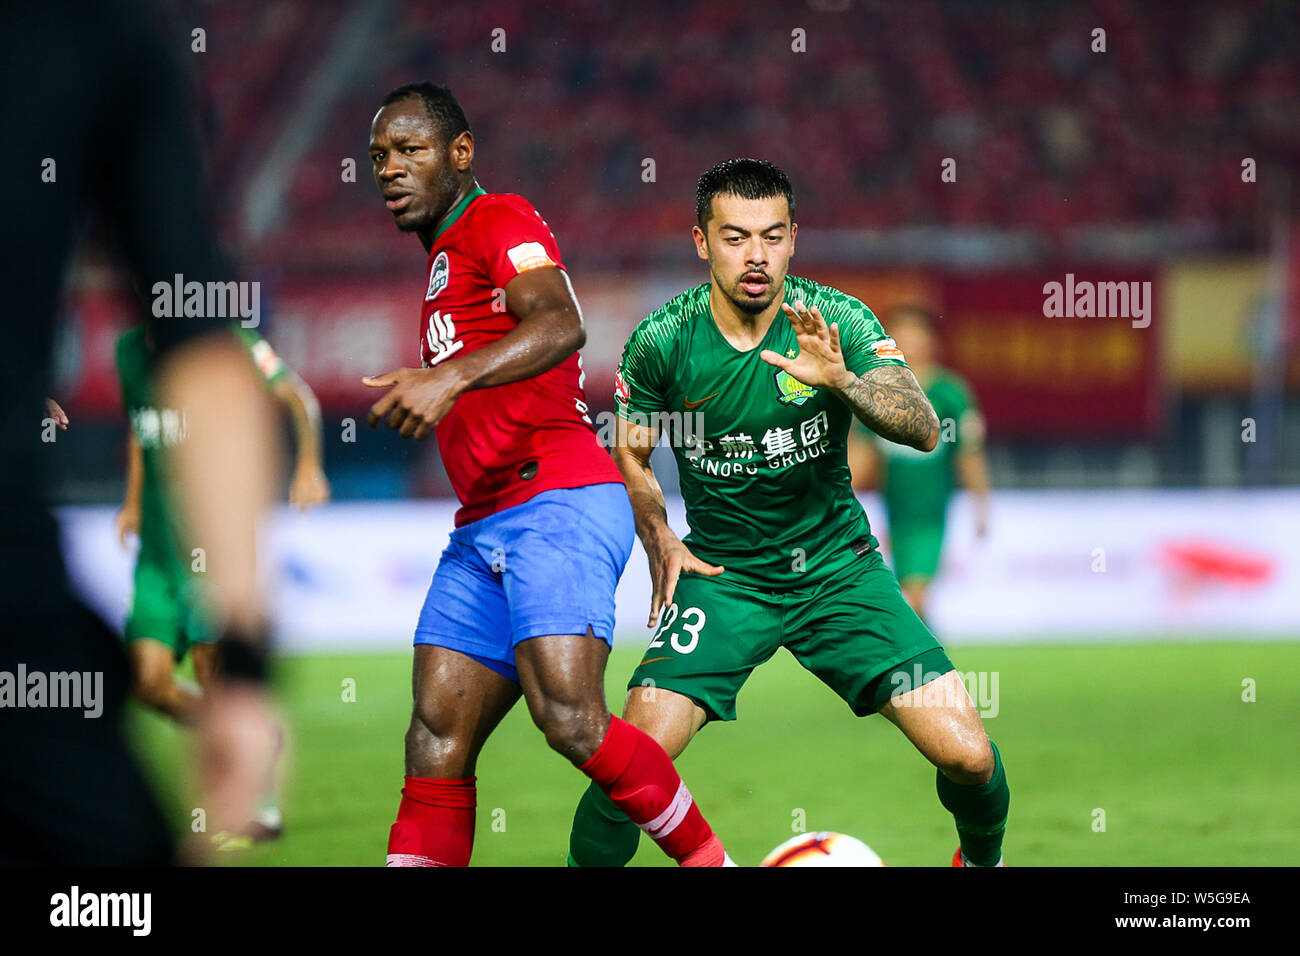 Cameroonian football player Christian Bassogog, left, of Henan Jianye passes the ball against English football player Nico Yennaris, known in China as Li Ke, of Beijing Sinobo Guoan in their 20th round match during the 2019 Chinese Football Association Super League (CSL) in Zhengzhou city, central China's Henan province, 27 July 2019. Henan Jianye defeated Beijing Sinobo Guoan 1-0. Stock Photo